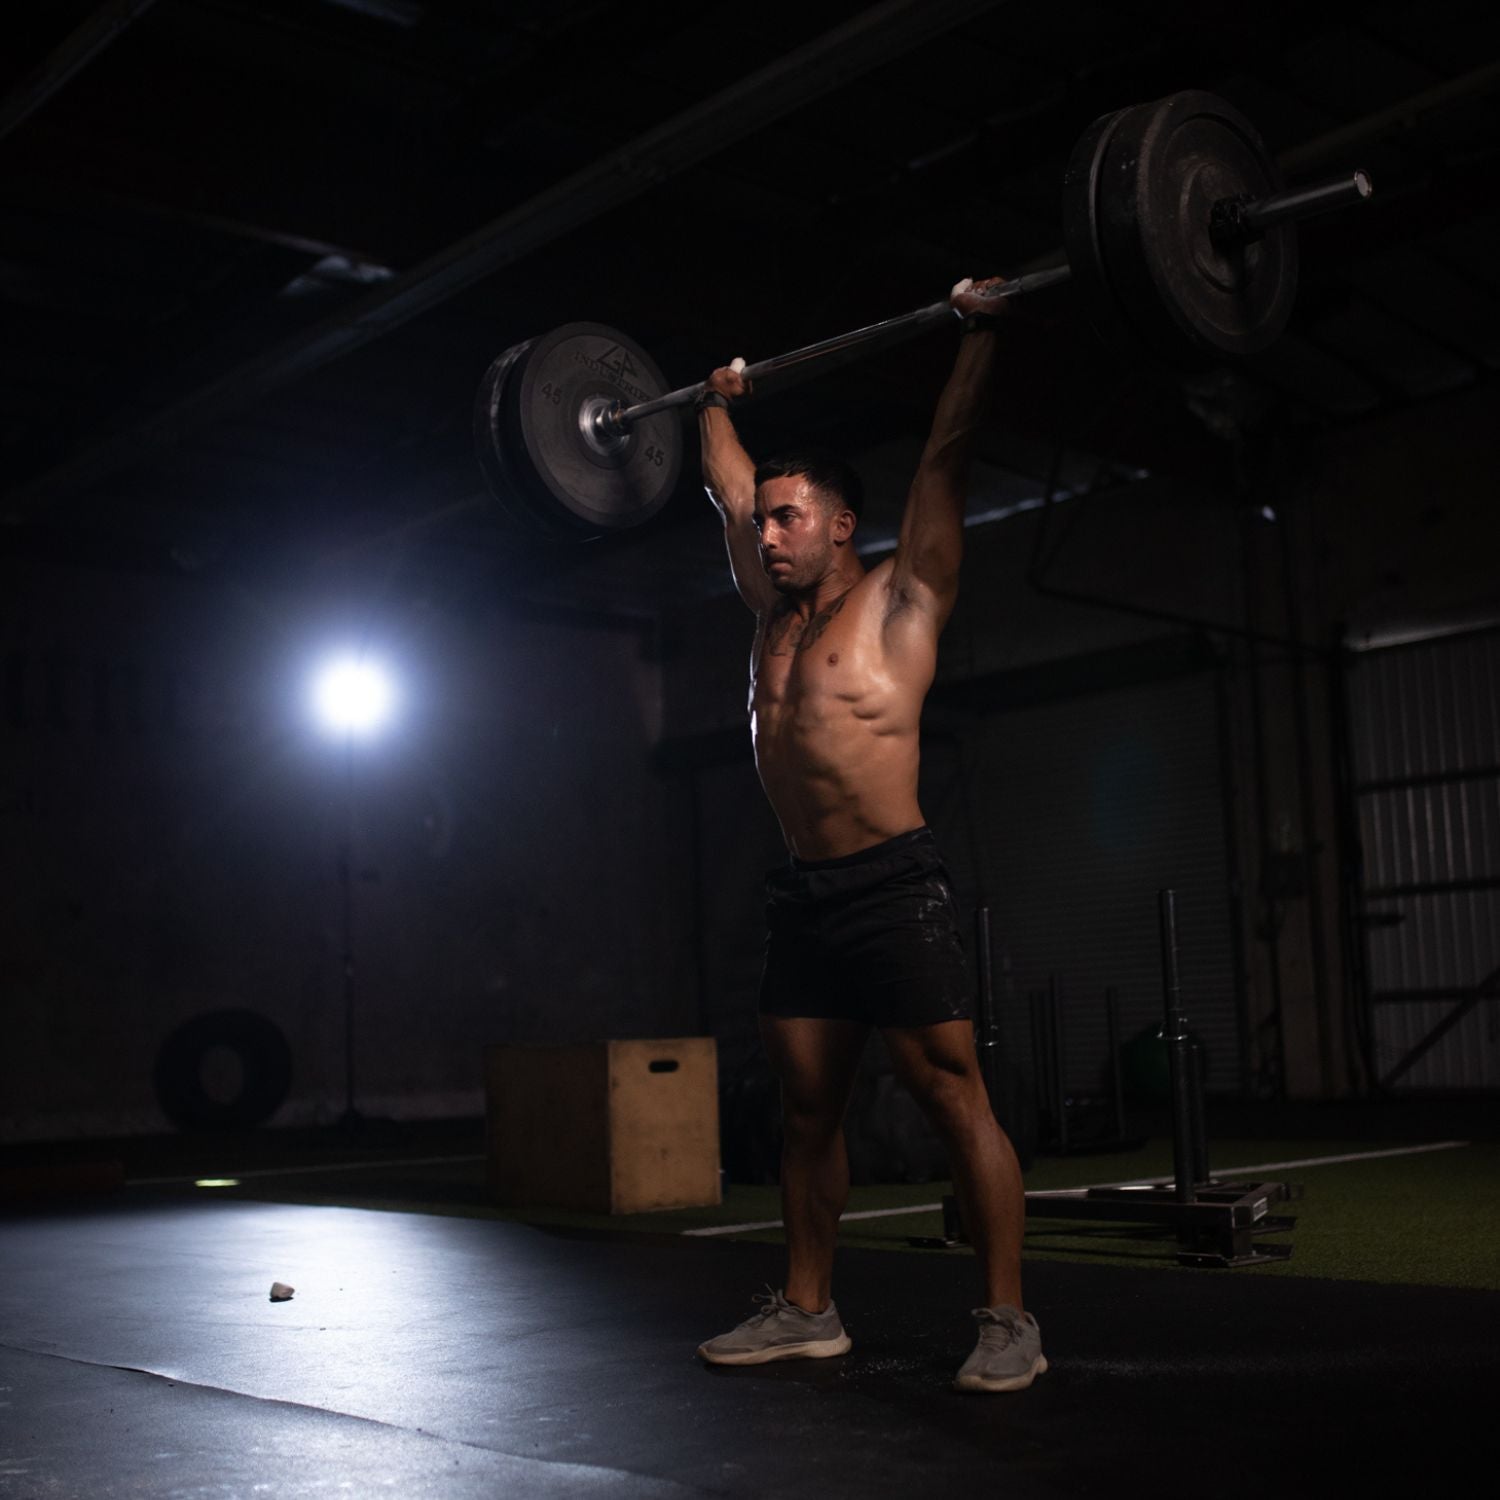 A fit athlete performing an overhead press with heavy weight on an olympic barbell after eating a liverking bar